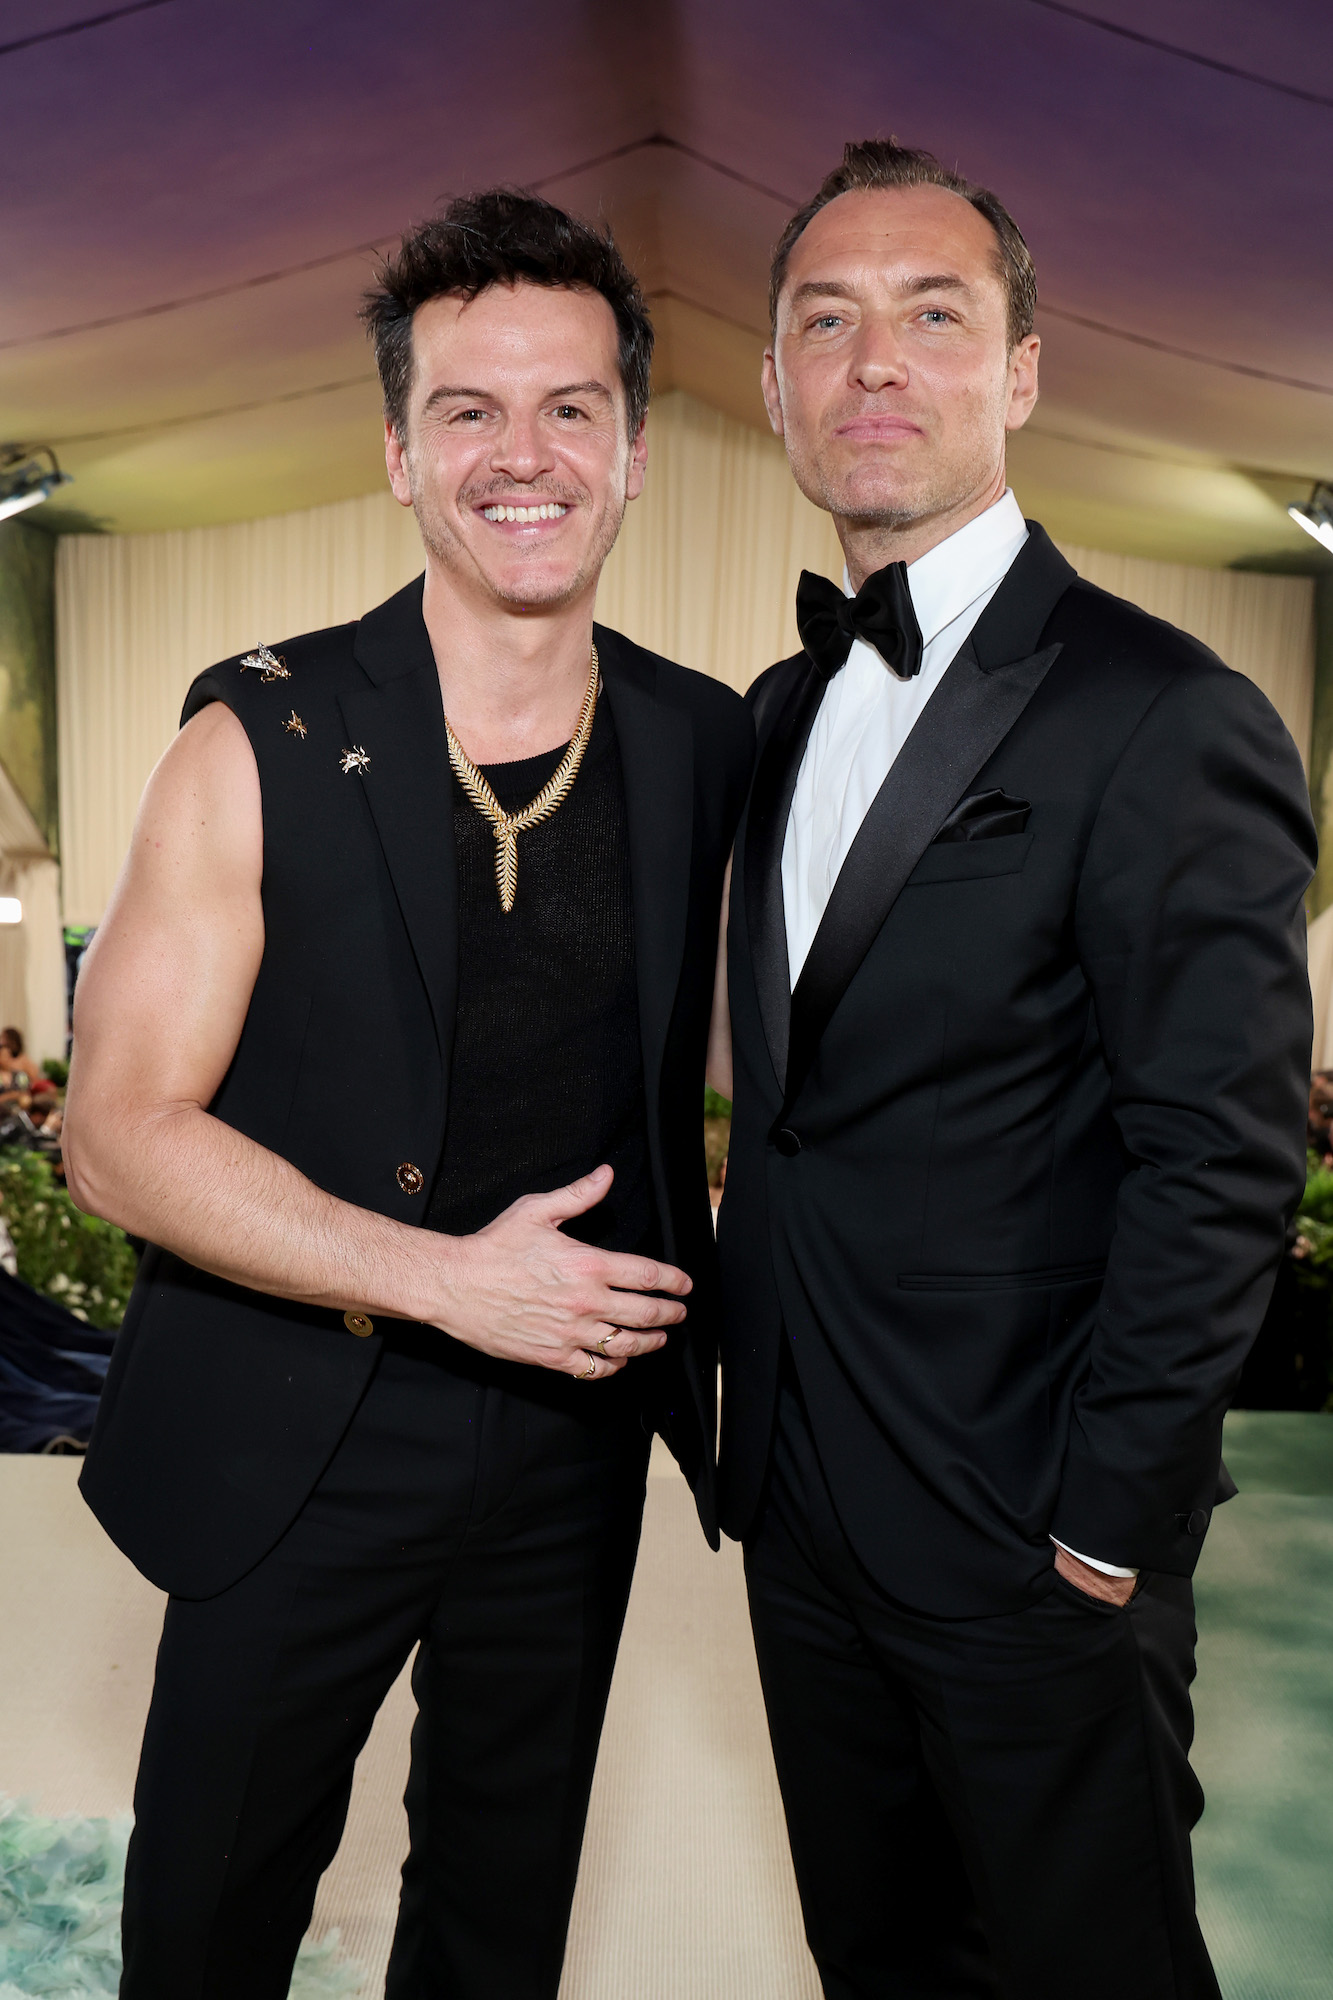 Andrew Scott and Jude Law Have a ‘Talented Mr. Ripley’ Meetup at Met Gala